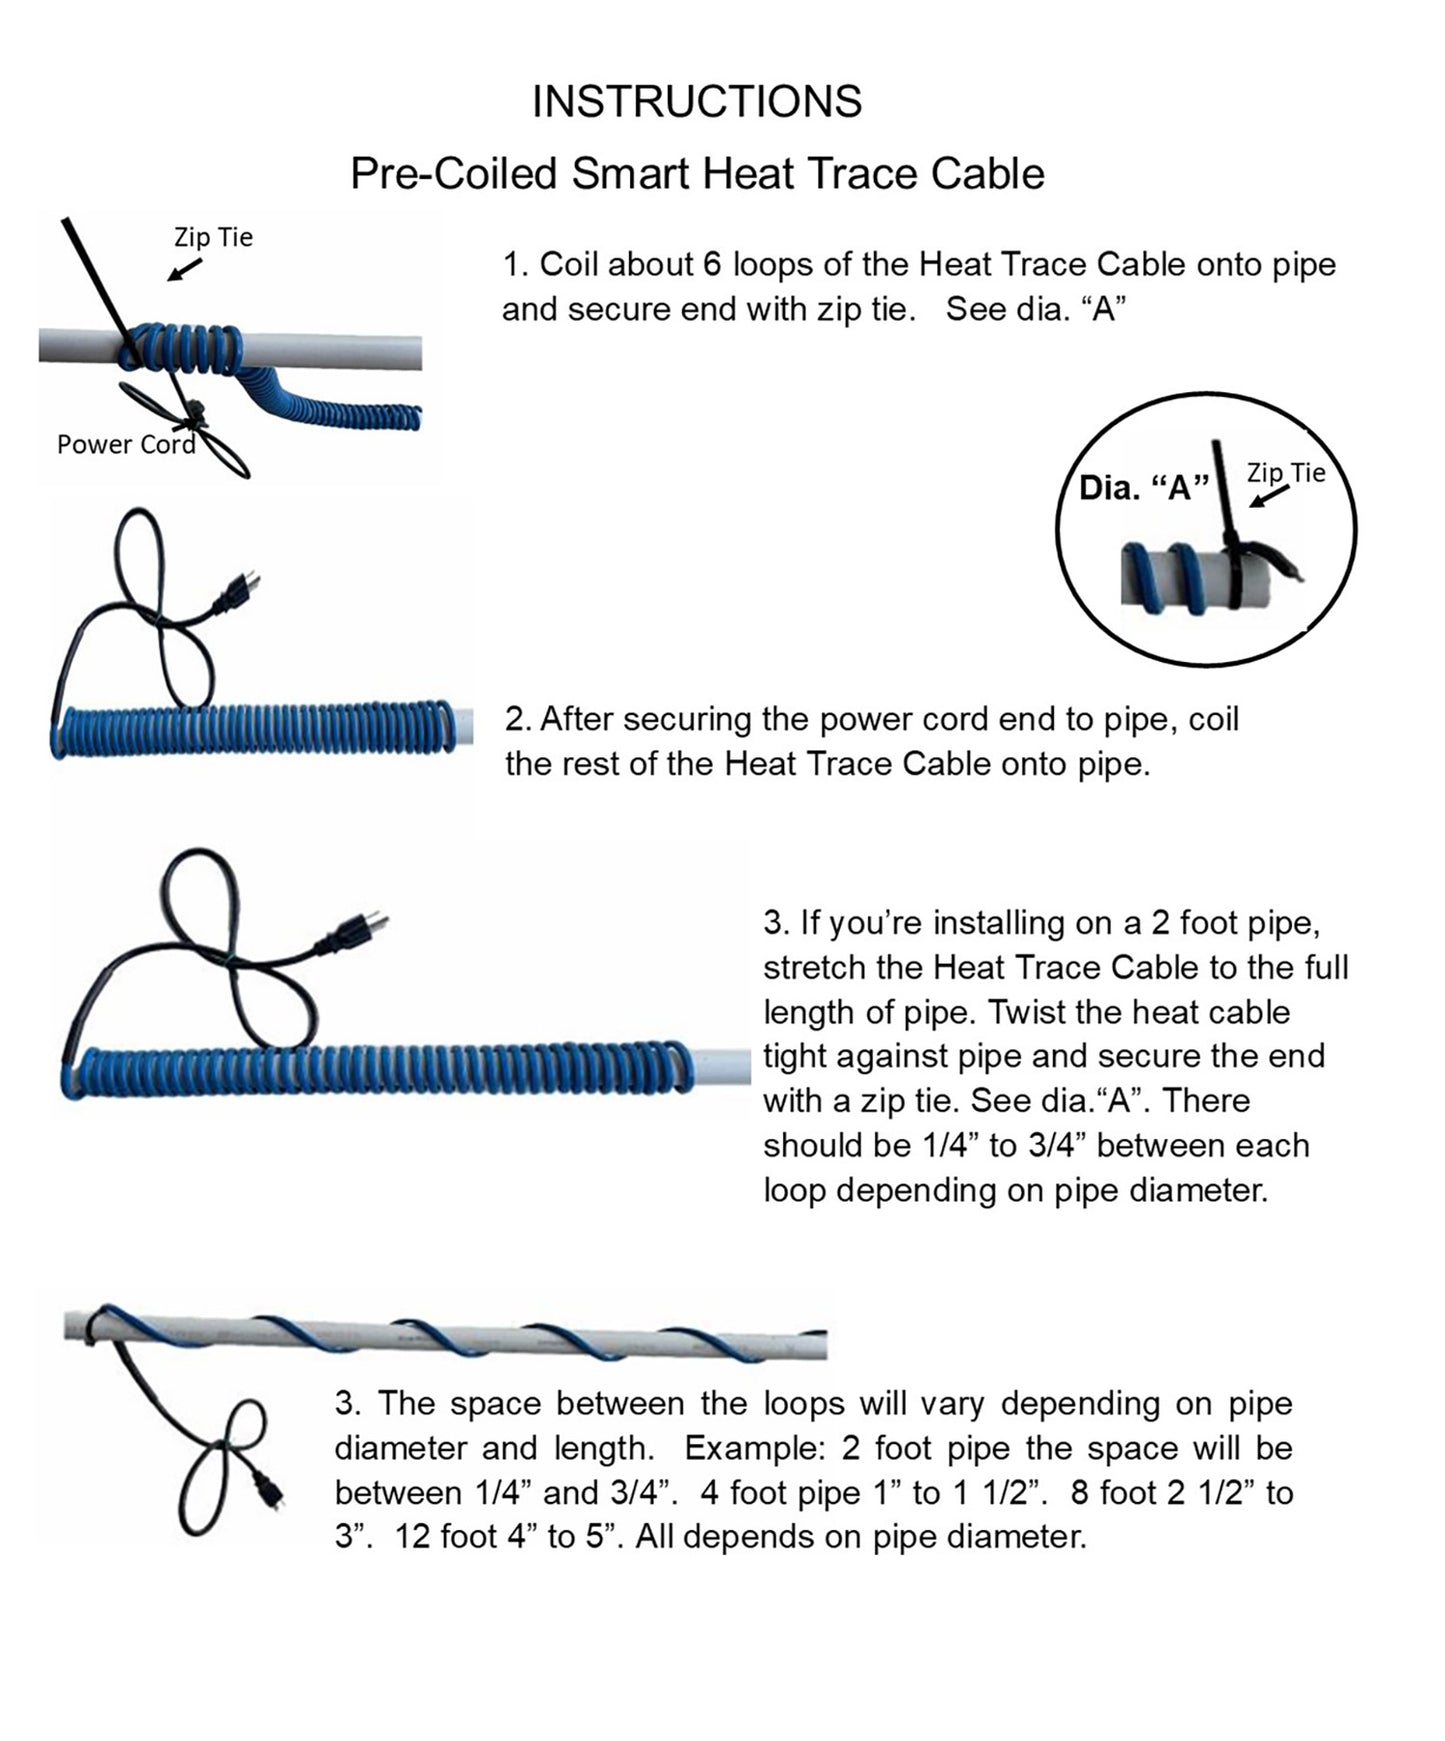 Smart Heat Trace Cable Pre-Coiled - Assembled in the USA for Superior Freeze Protection